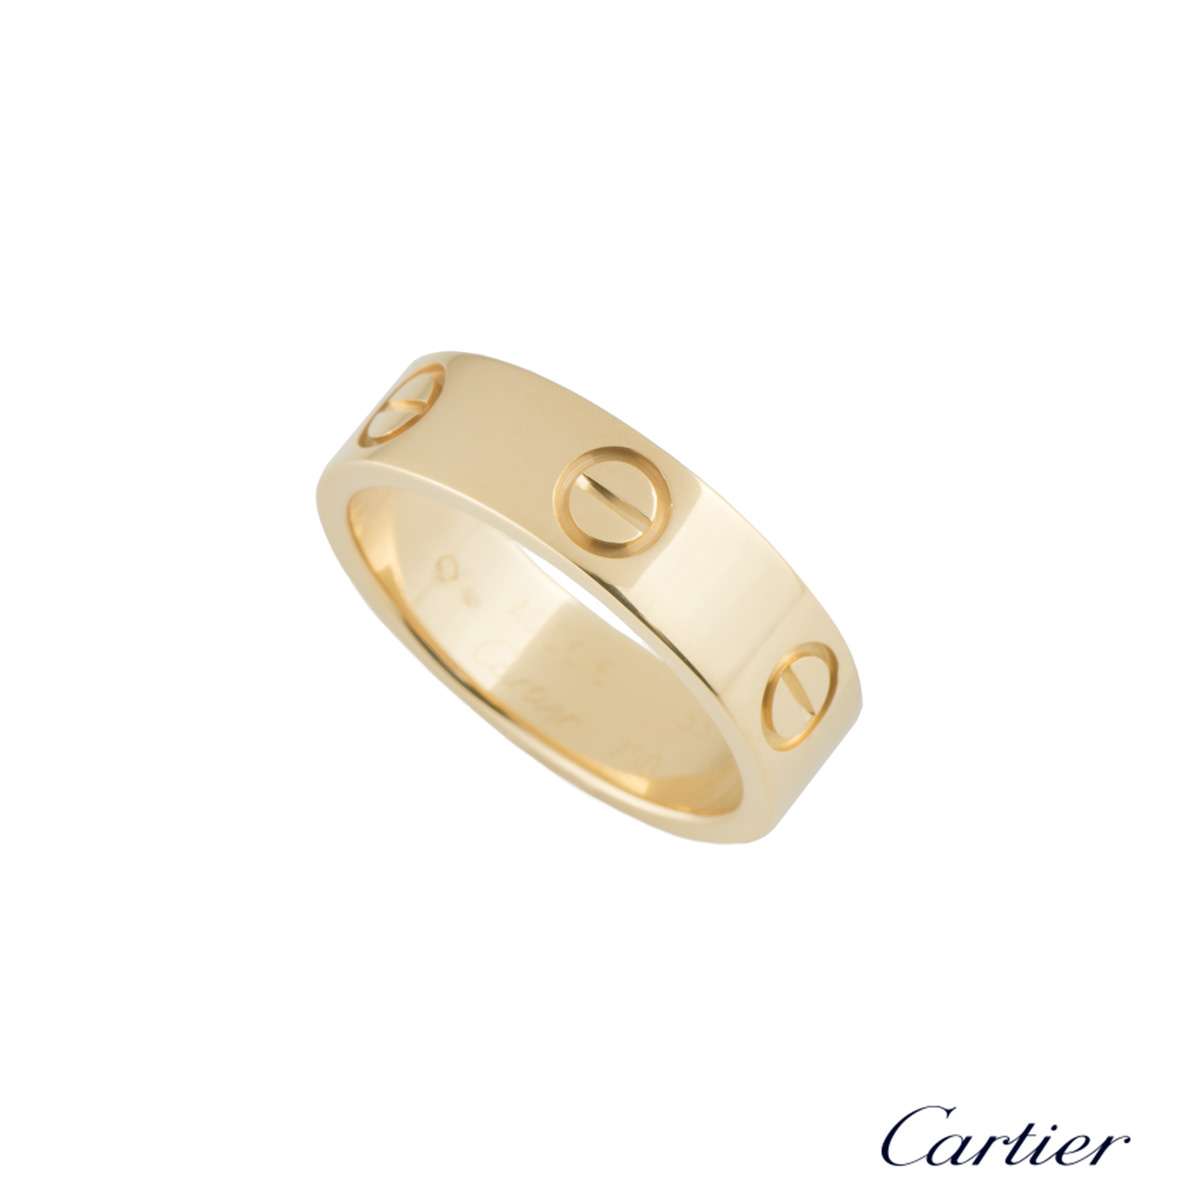 Cartier Yellow Gold Love Ring Size 53 